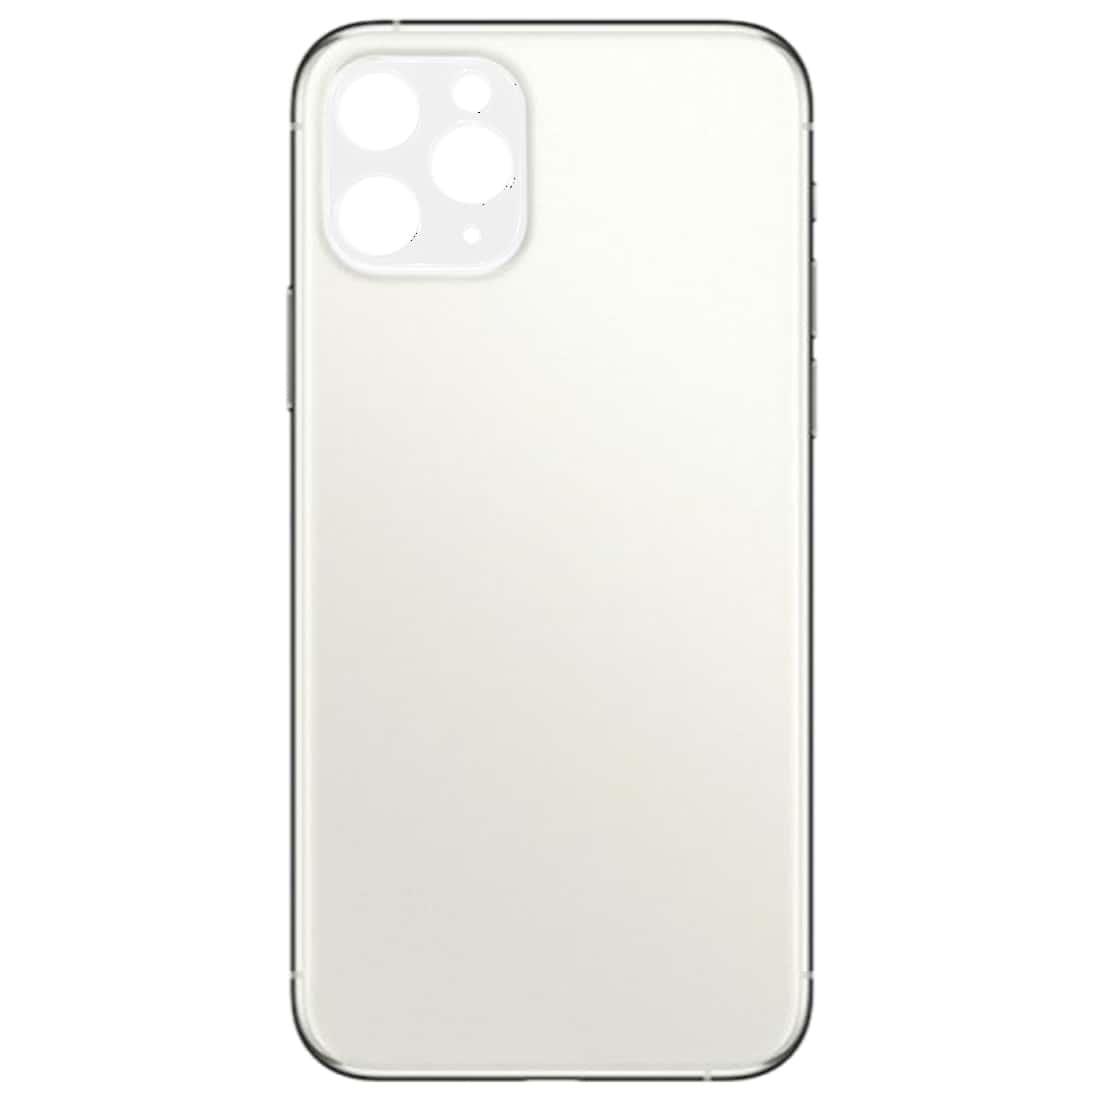 Back Glass Panel for  iPhone 11 Pro White